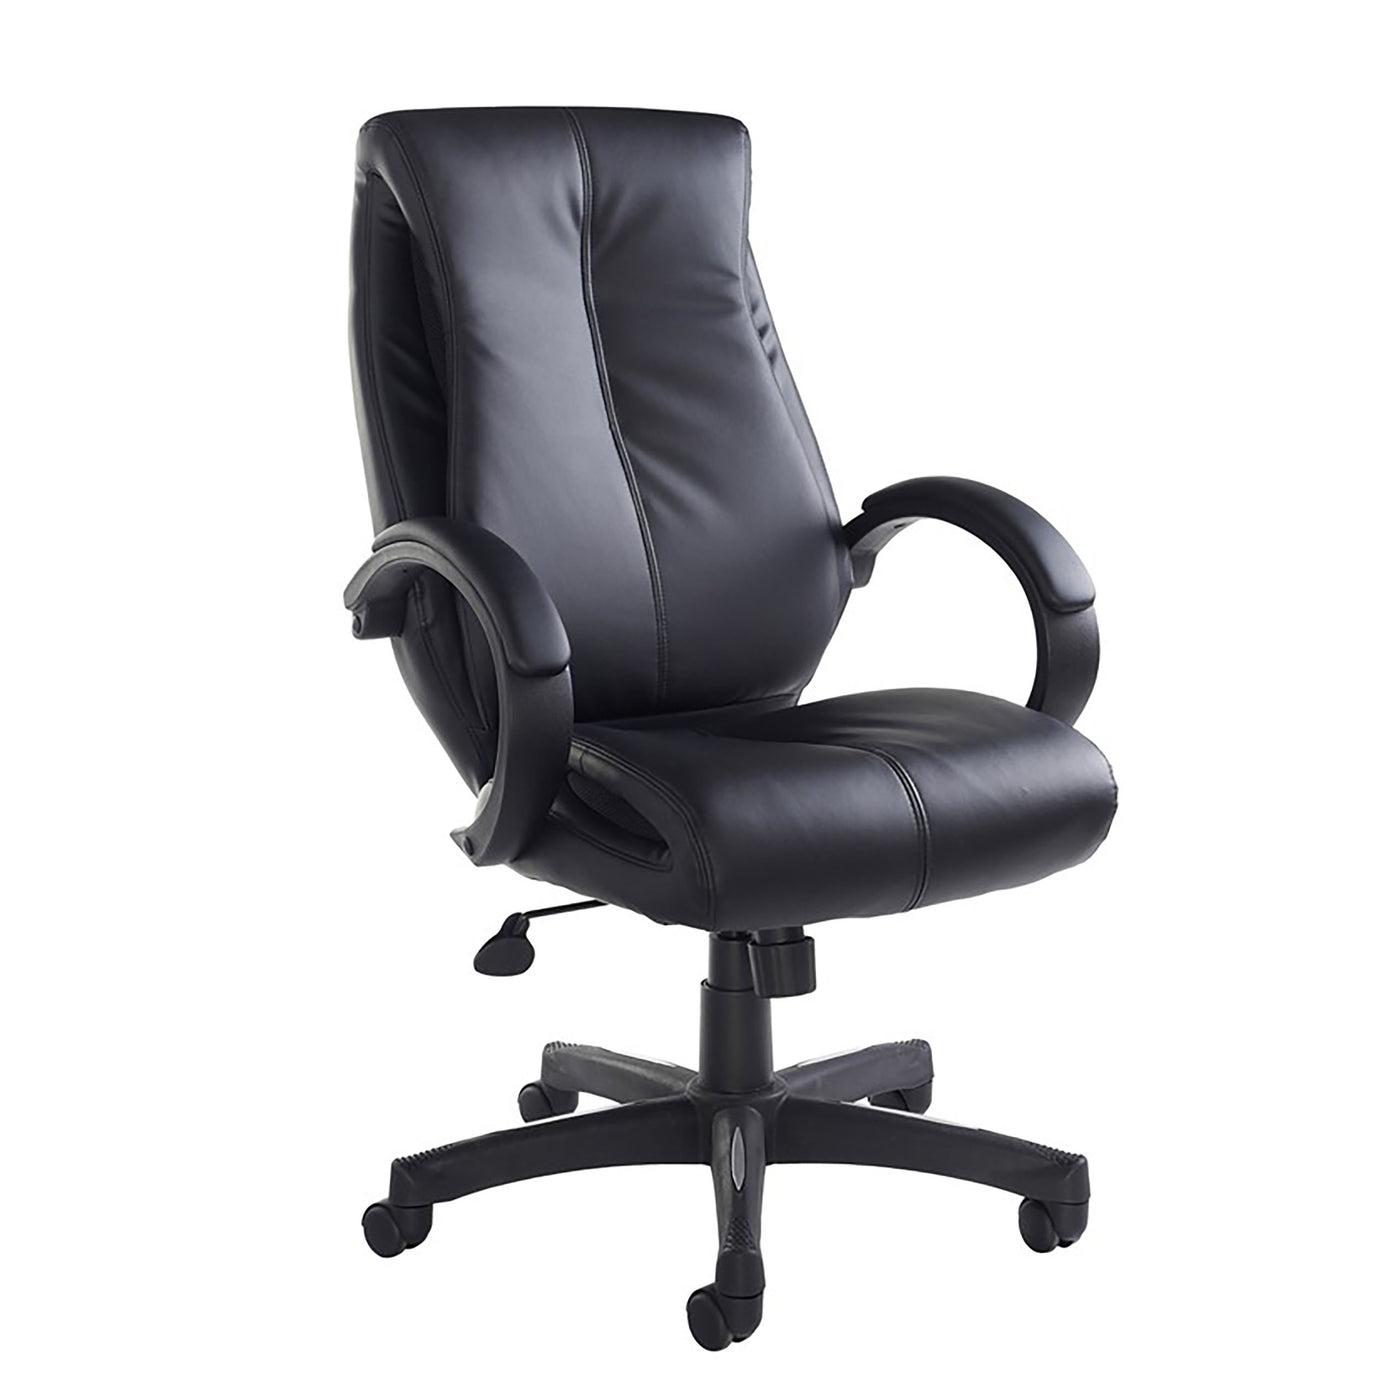 Nantes Black Home Office Chair | Home Office Furniture | Ergonomic Office Chair | Office Furnishings